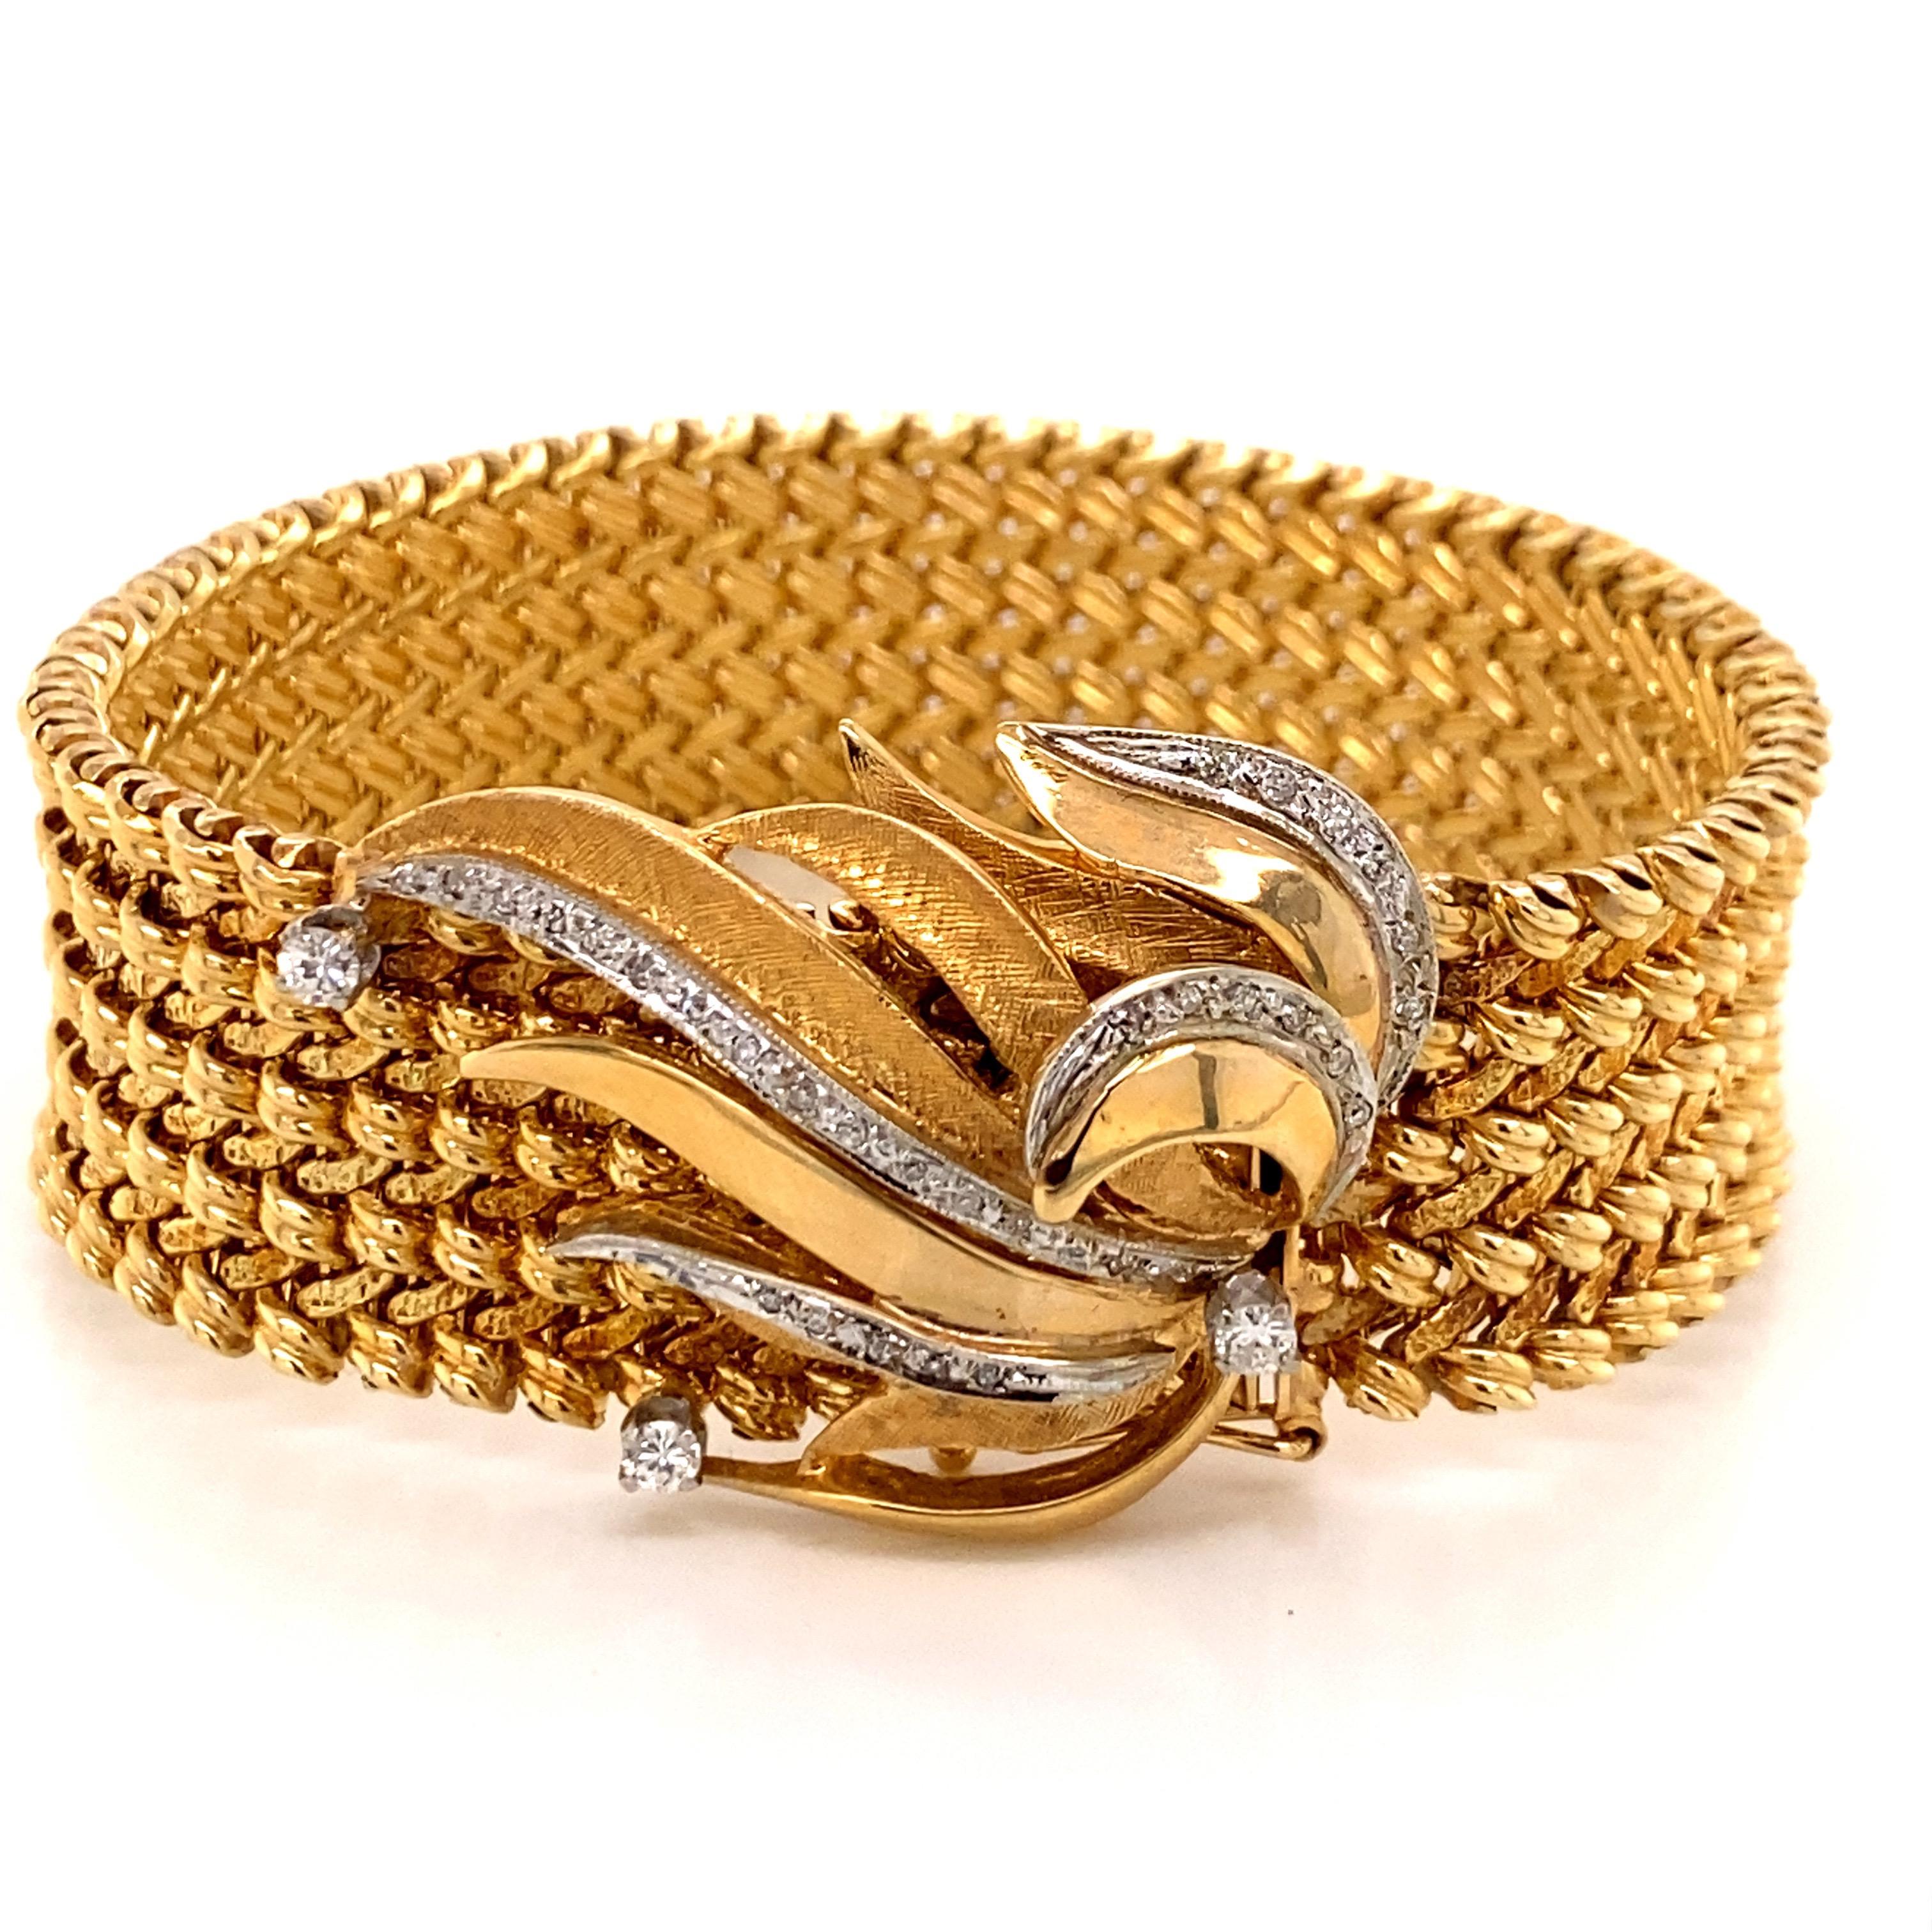 Vintage 1960's 14K Yellow Gold Wide Woven Link Bracelet with Diamond Leaf Clasp - The bracelet measures 7 inches long and 3/4 inches wide. The diamond leaf clasp contains 33 single cut diamonds and 3 full cut diamonds with a total weight of .50ct